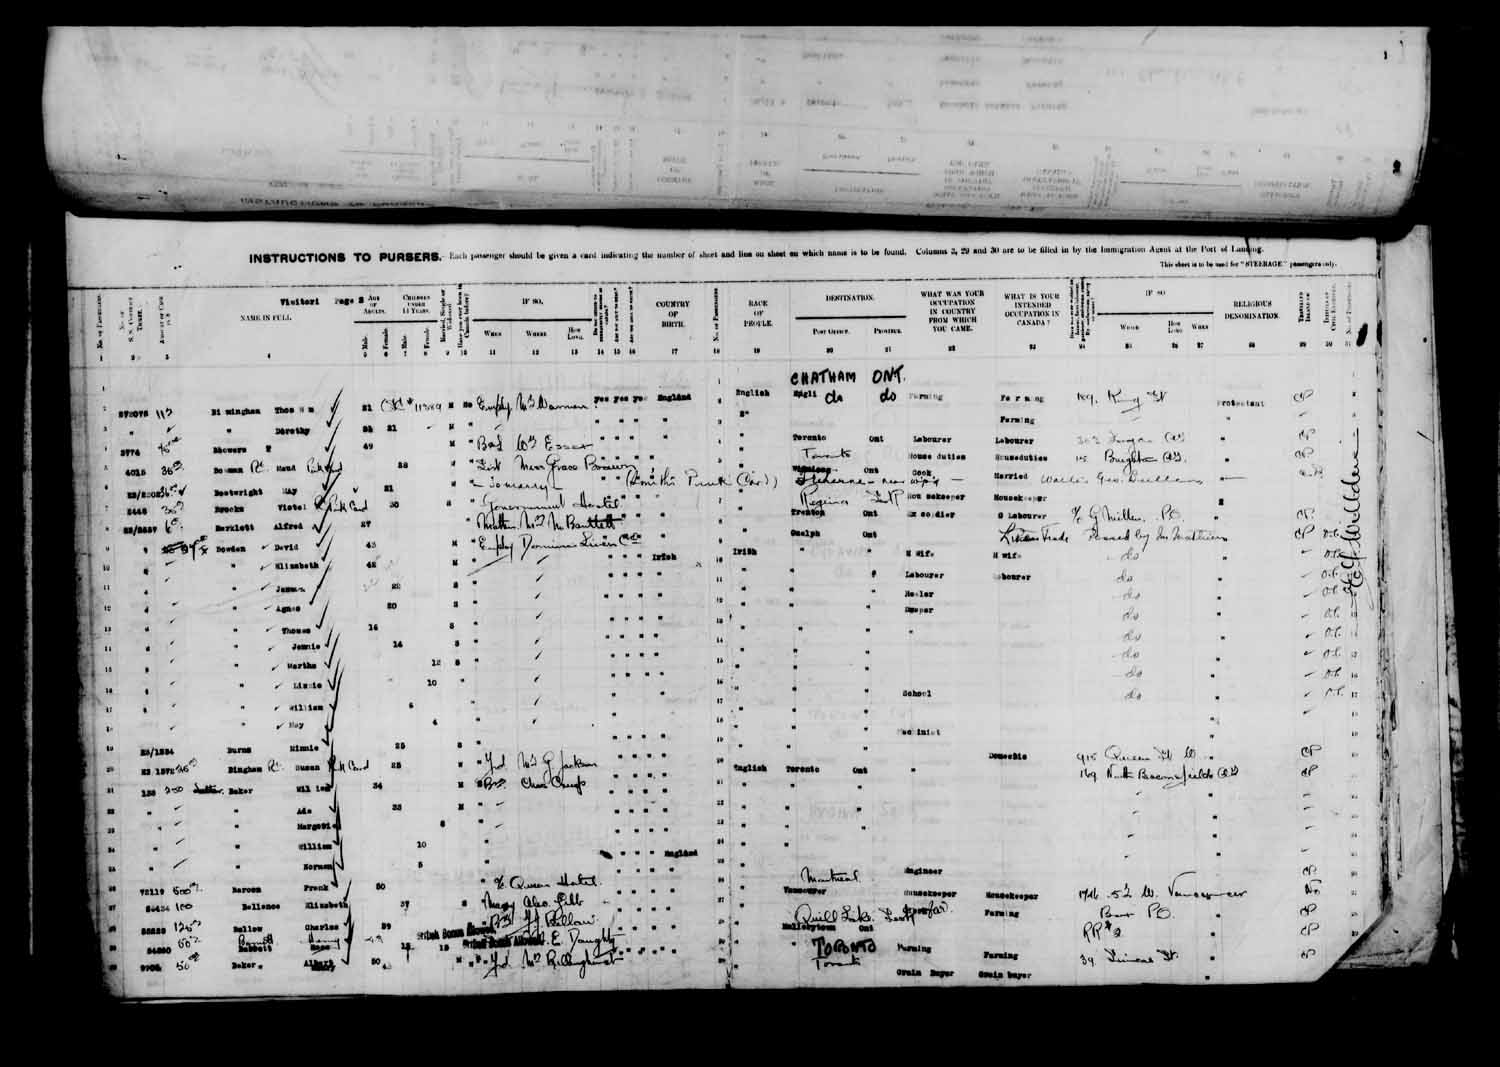 Digitized page of Passenger Lists for Image No.: e003610643